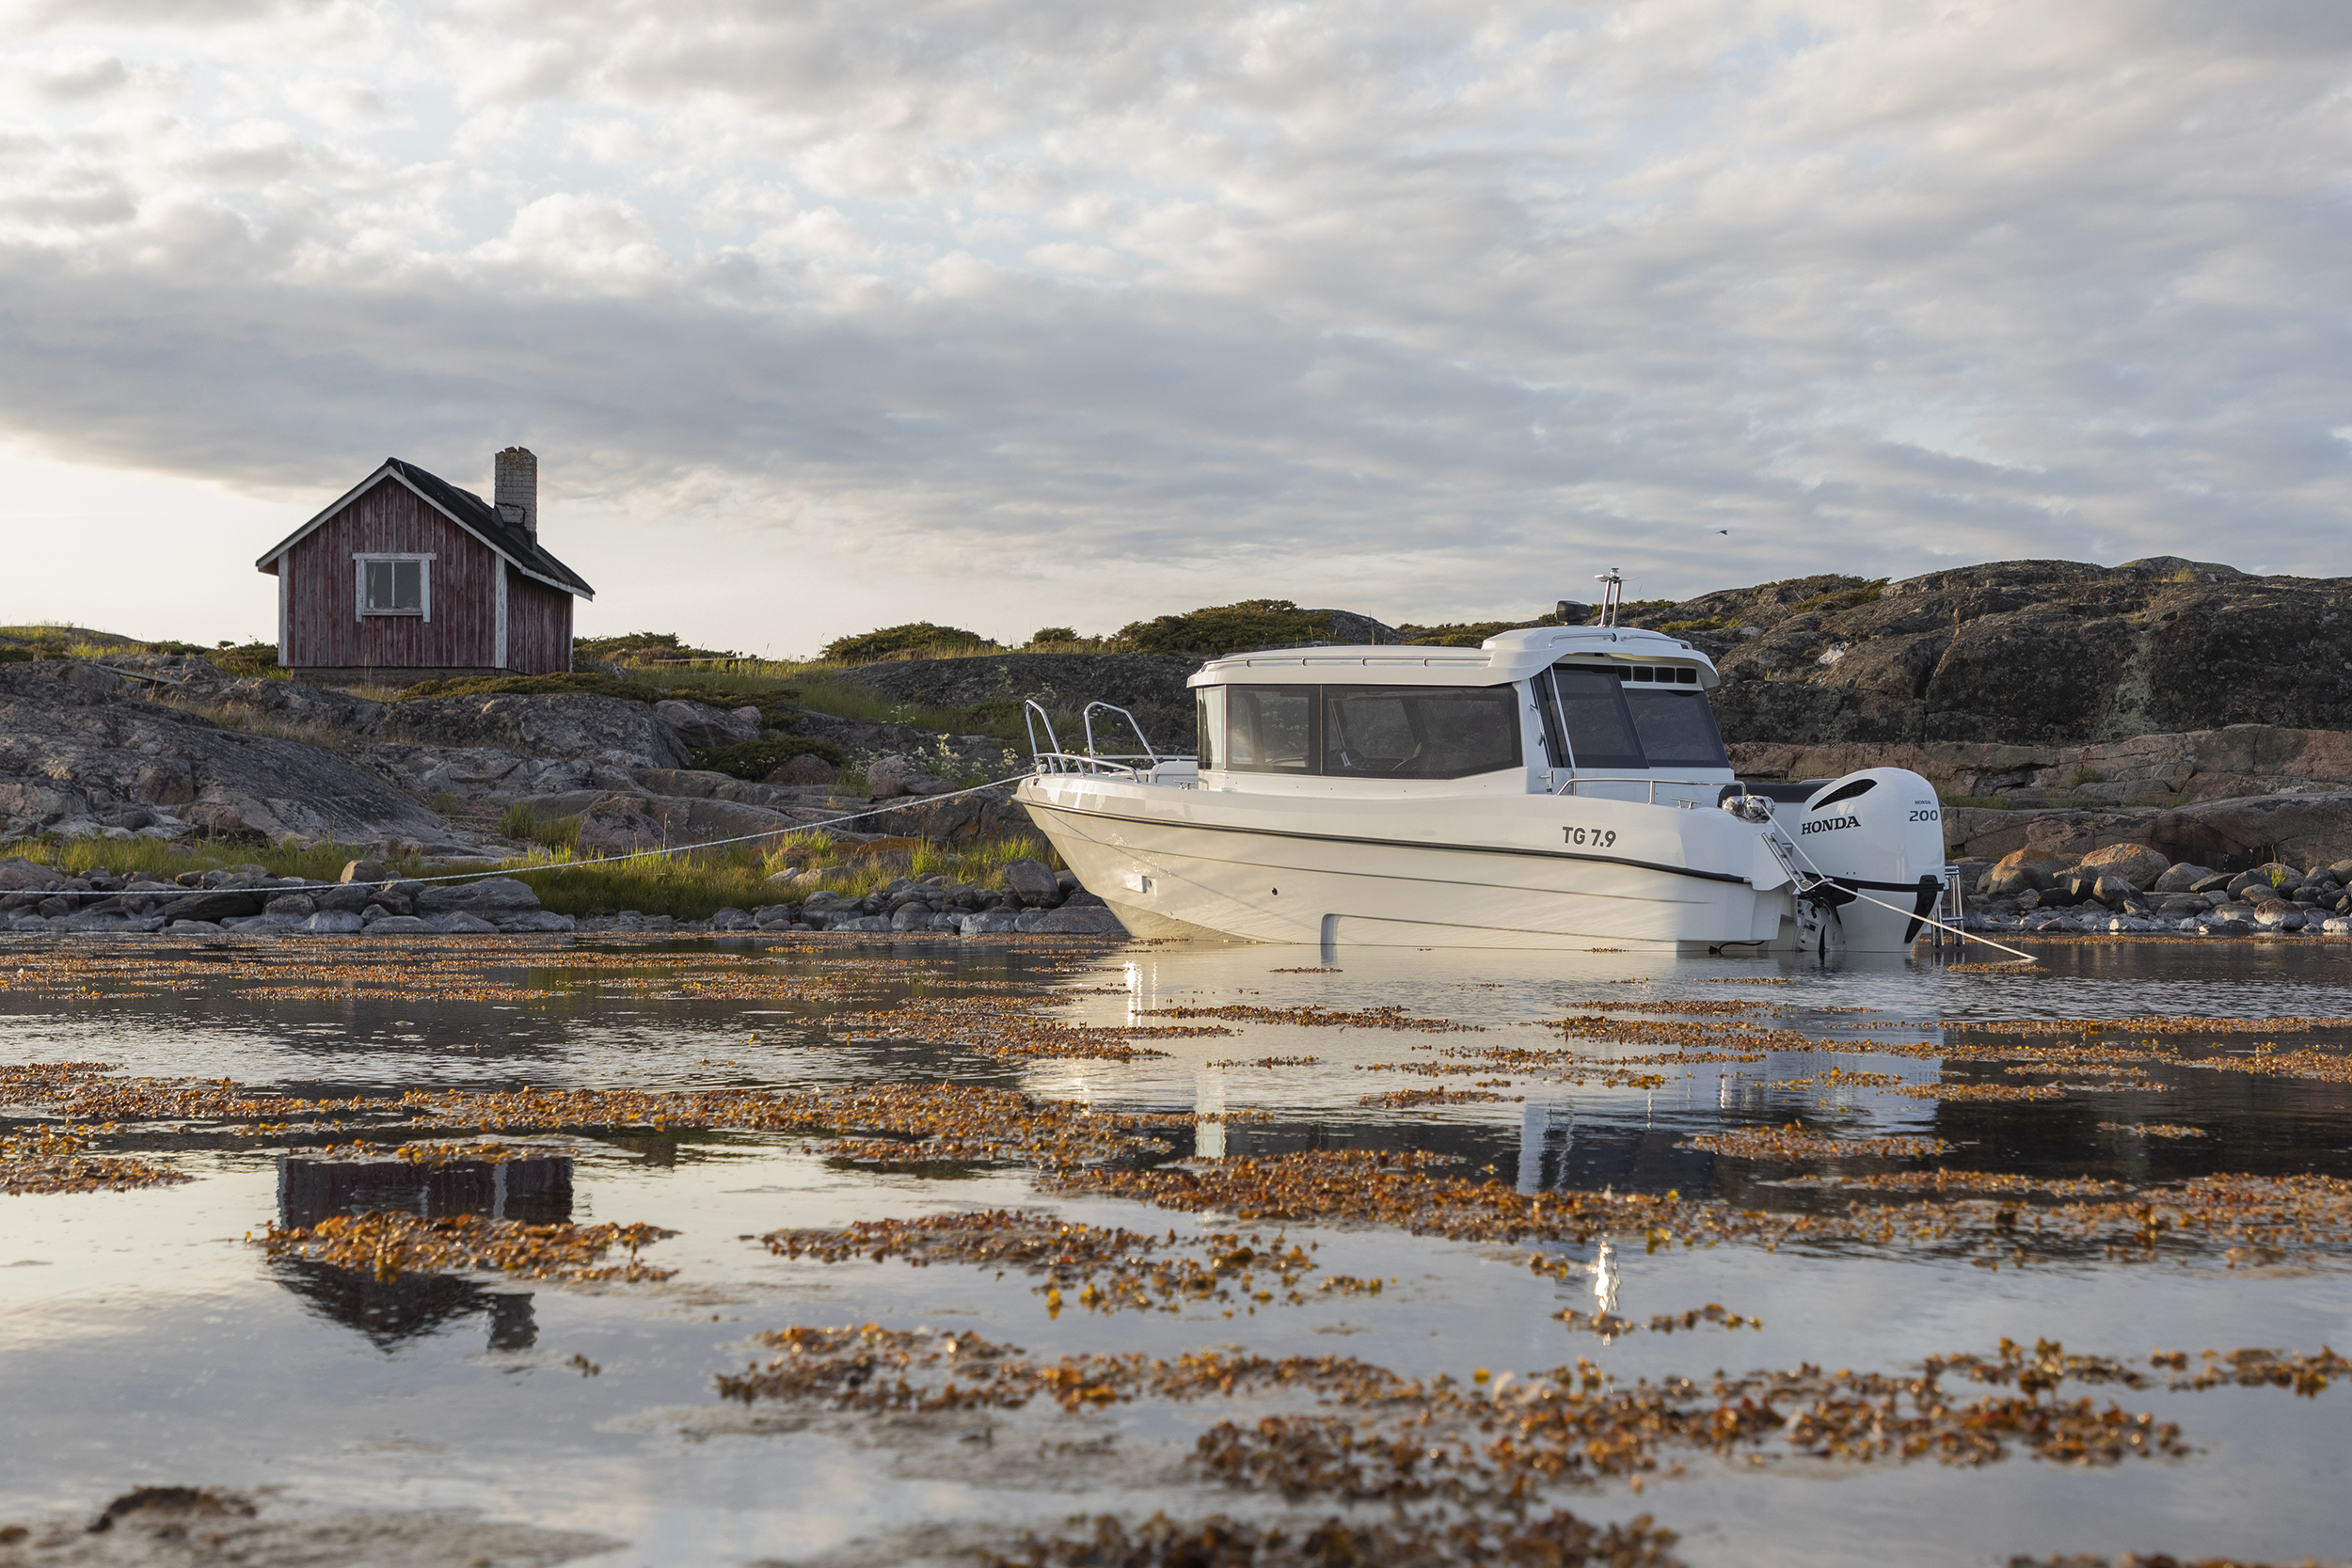 TG 7.9 cabin boat in the evening sun at a natural harbor in the outer Finnish archipelago.